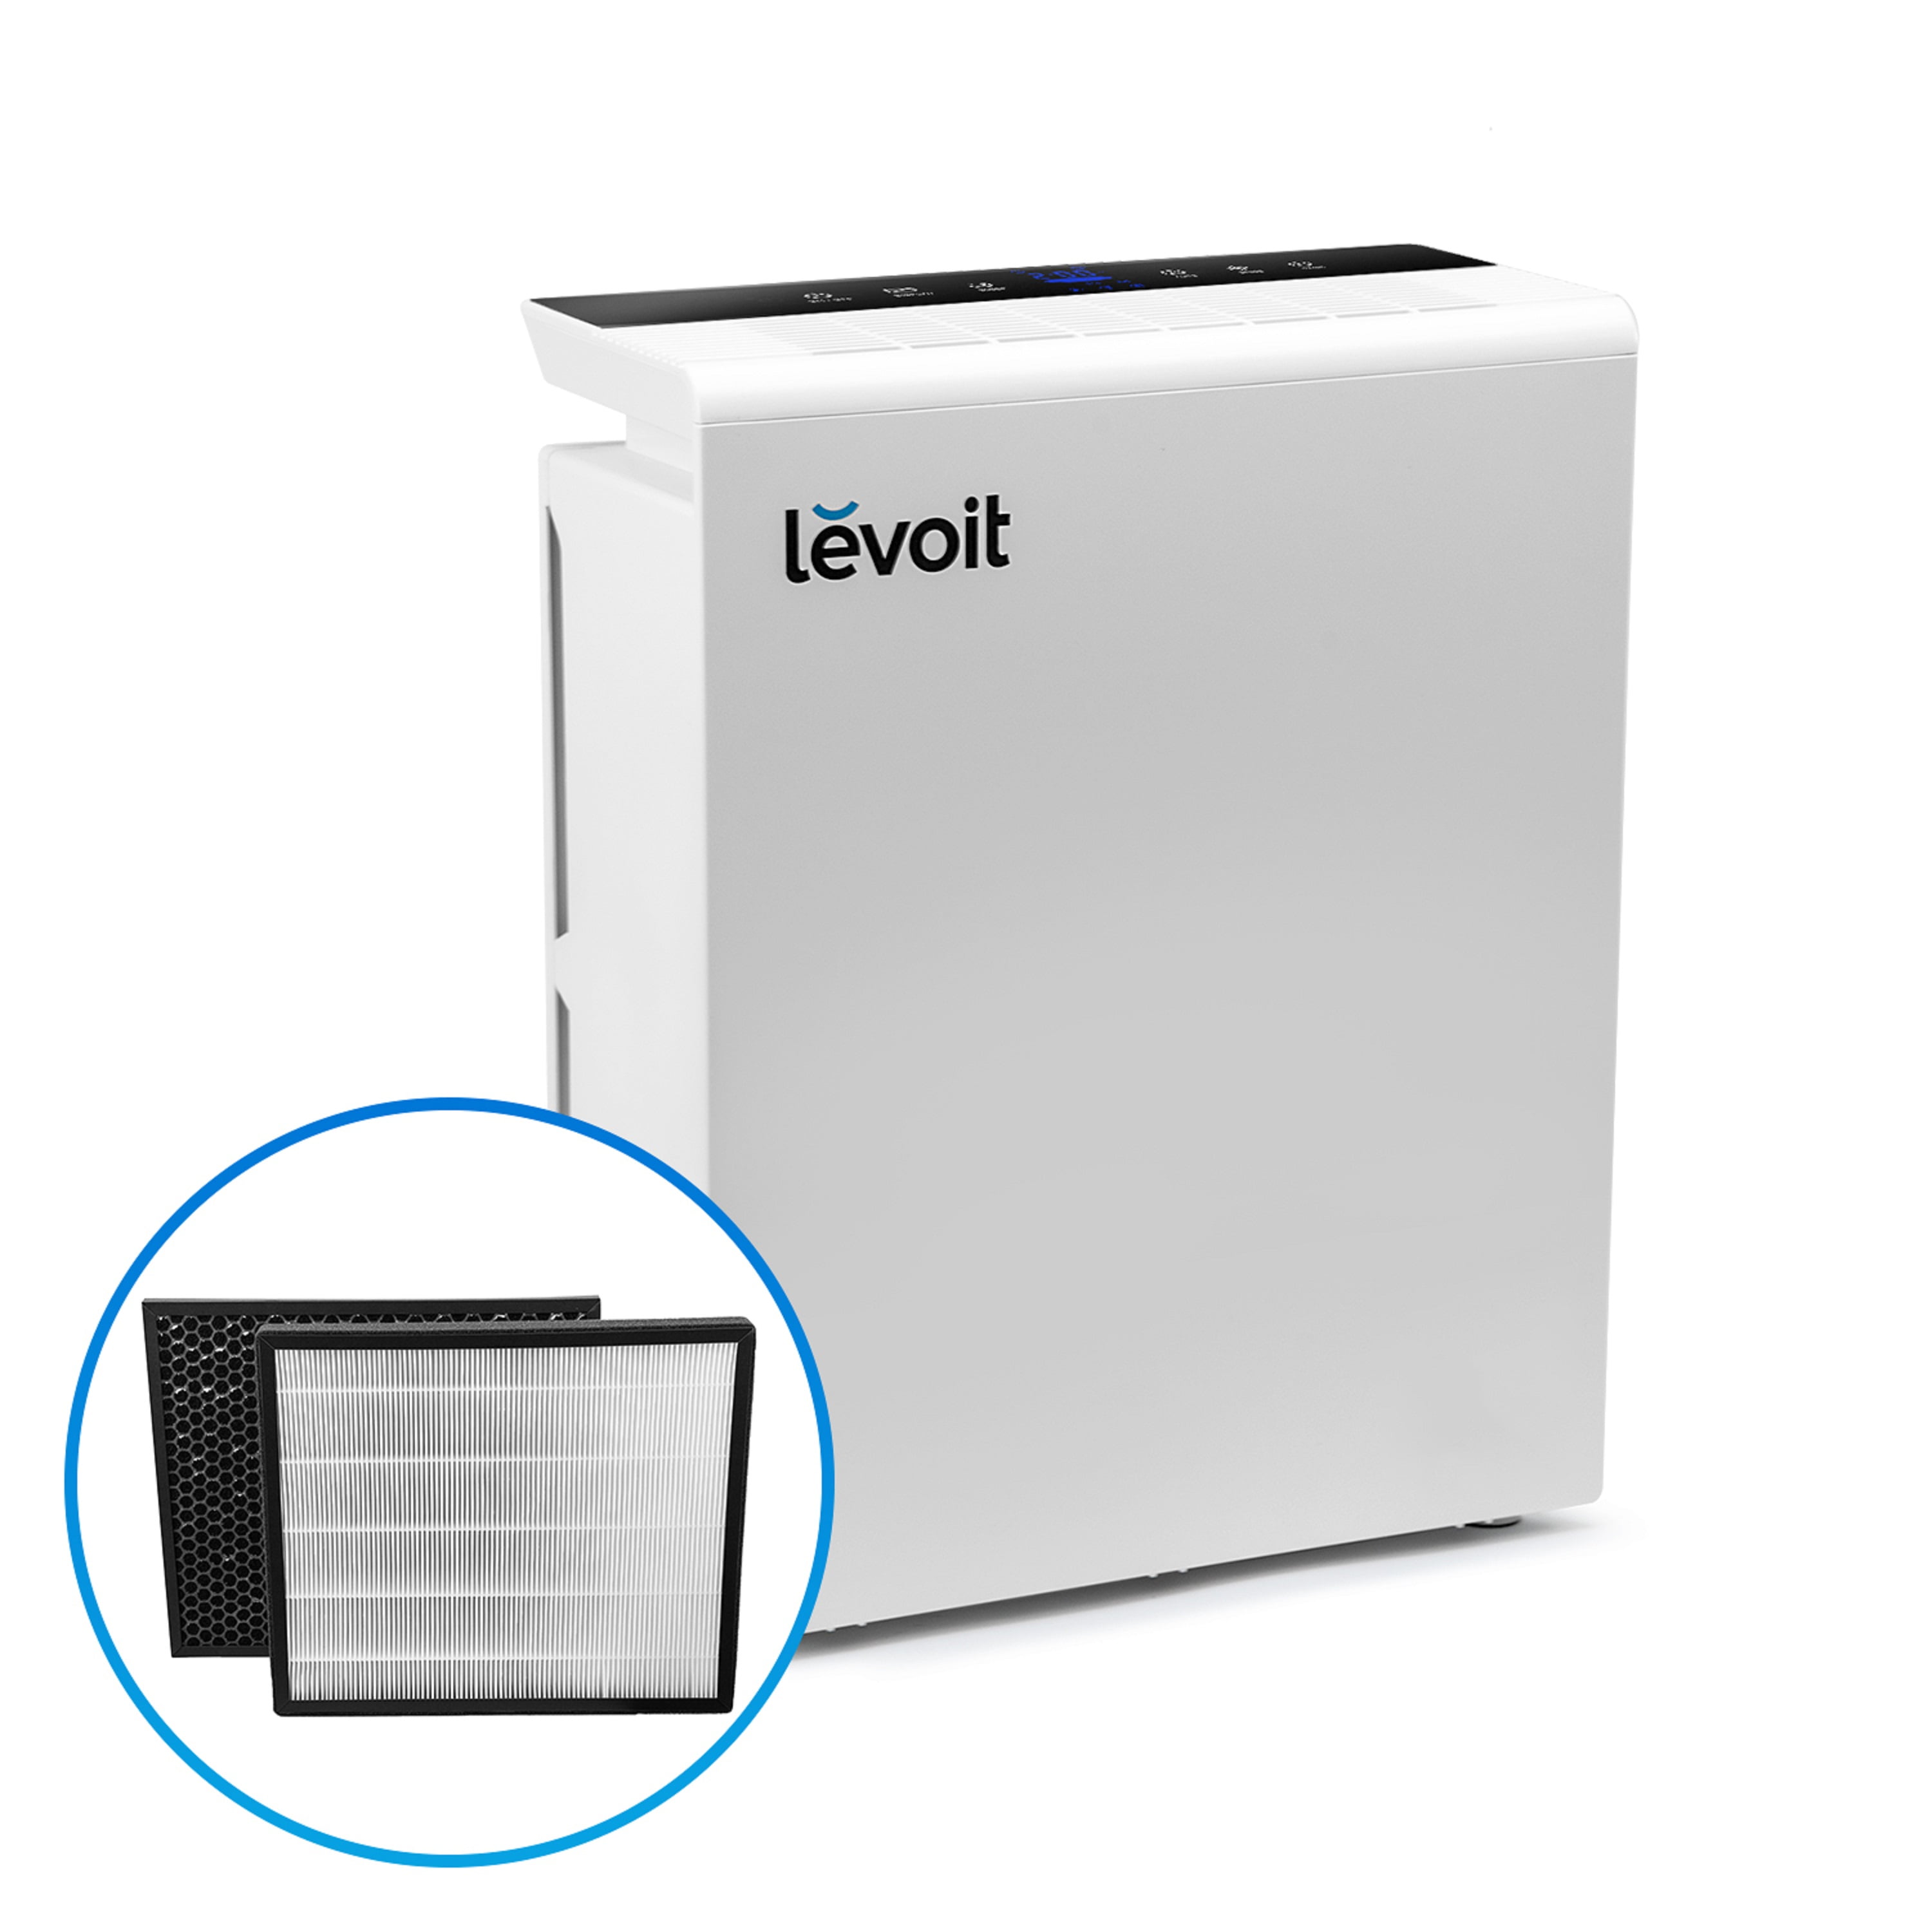 Levoit Smart Wi-Fi Air Purifier with H13 True HEPA Filter, Cleanses the Air,  Covers 290 Sq ft, White 